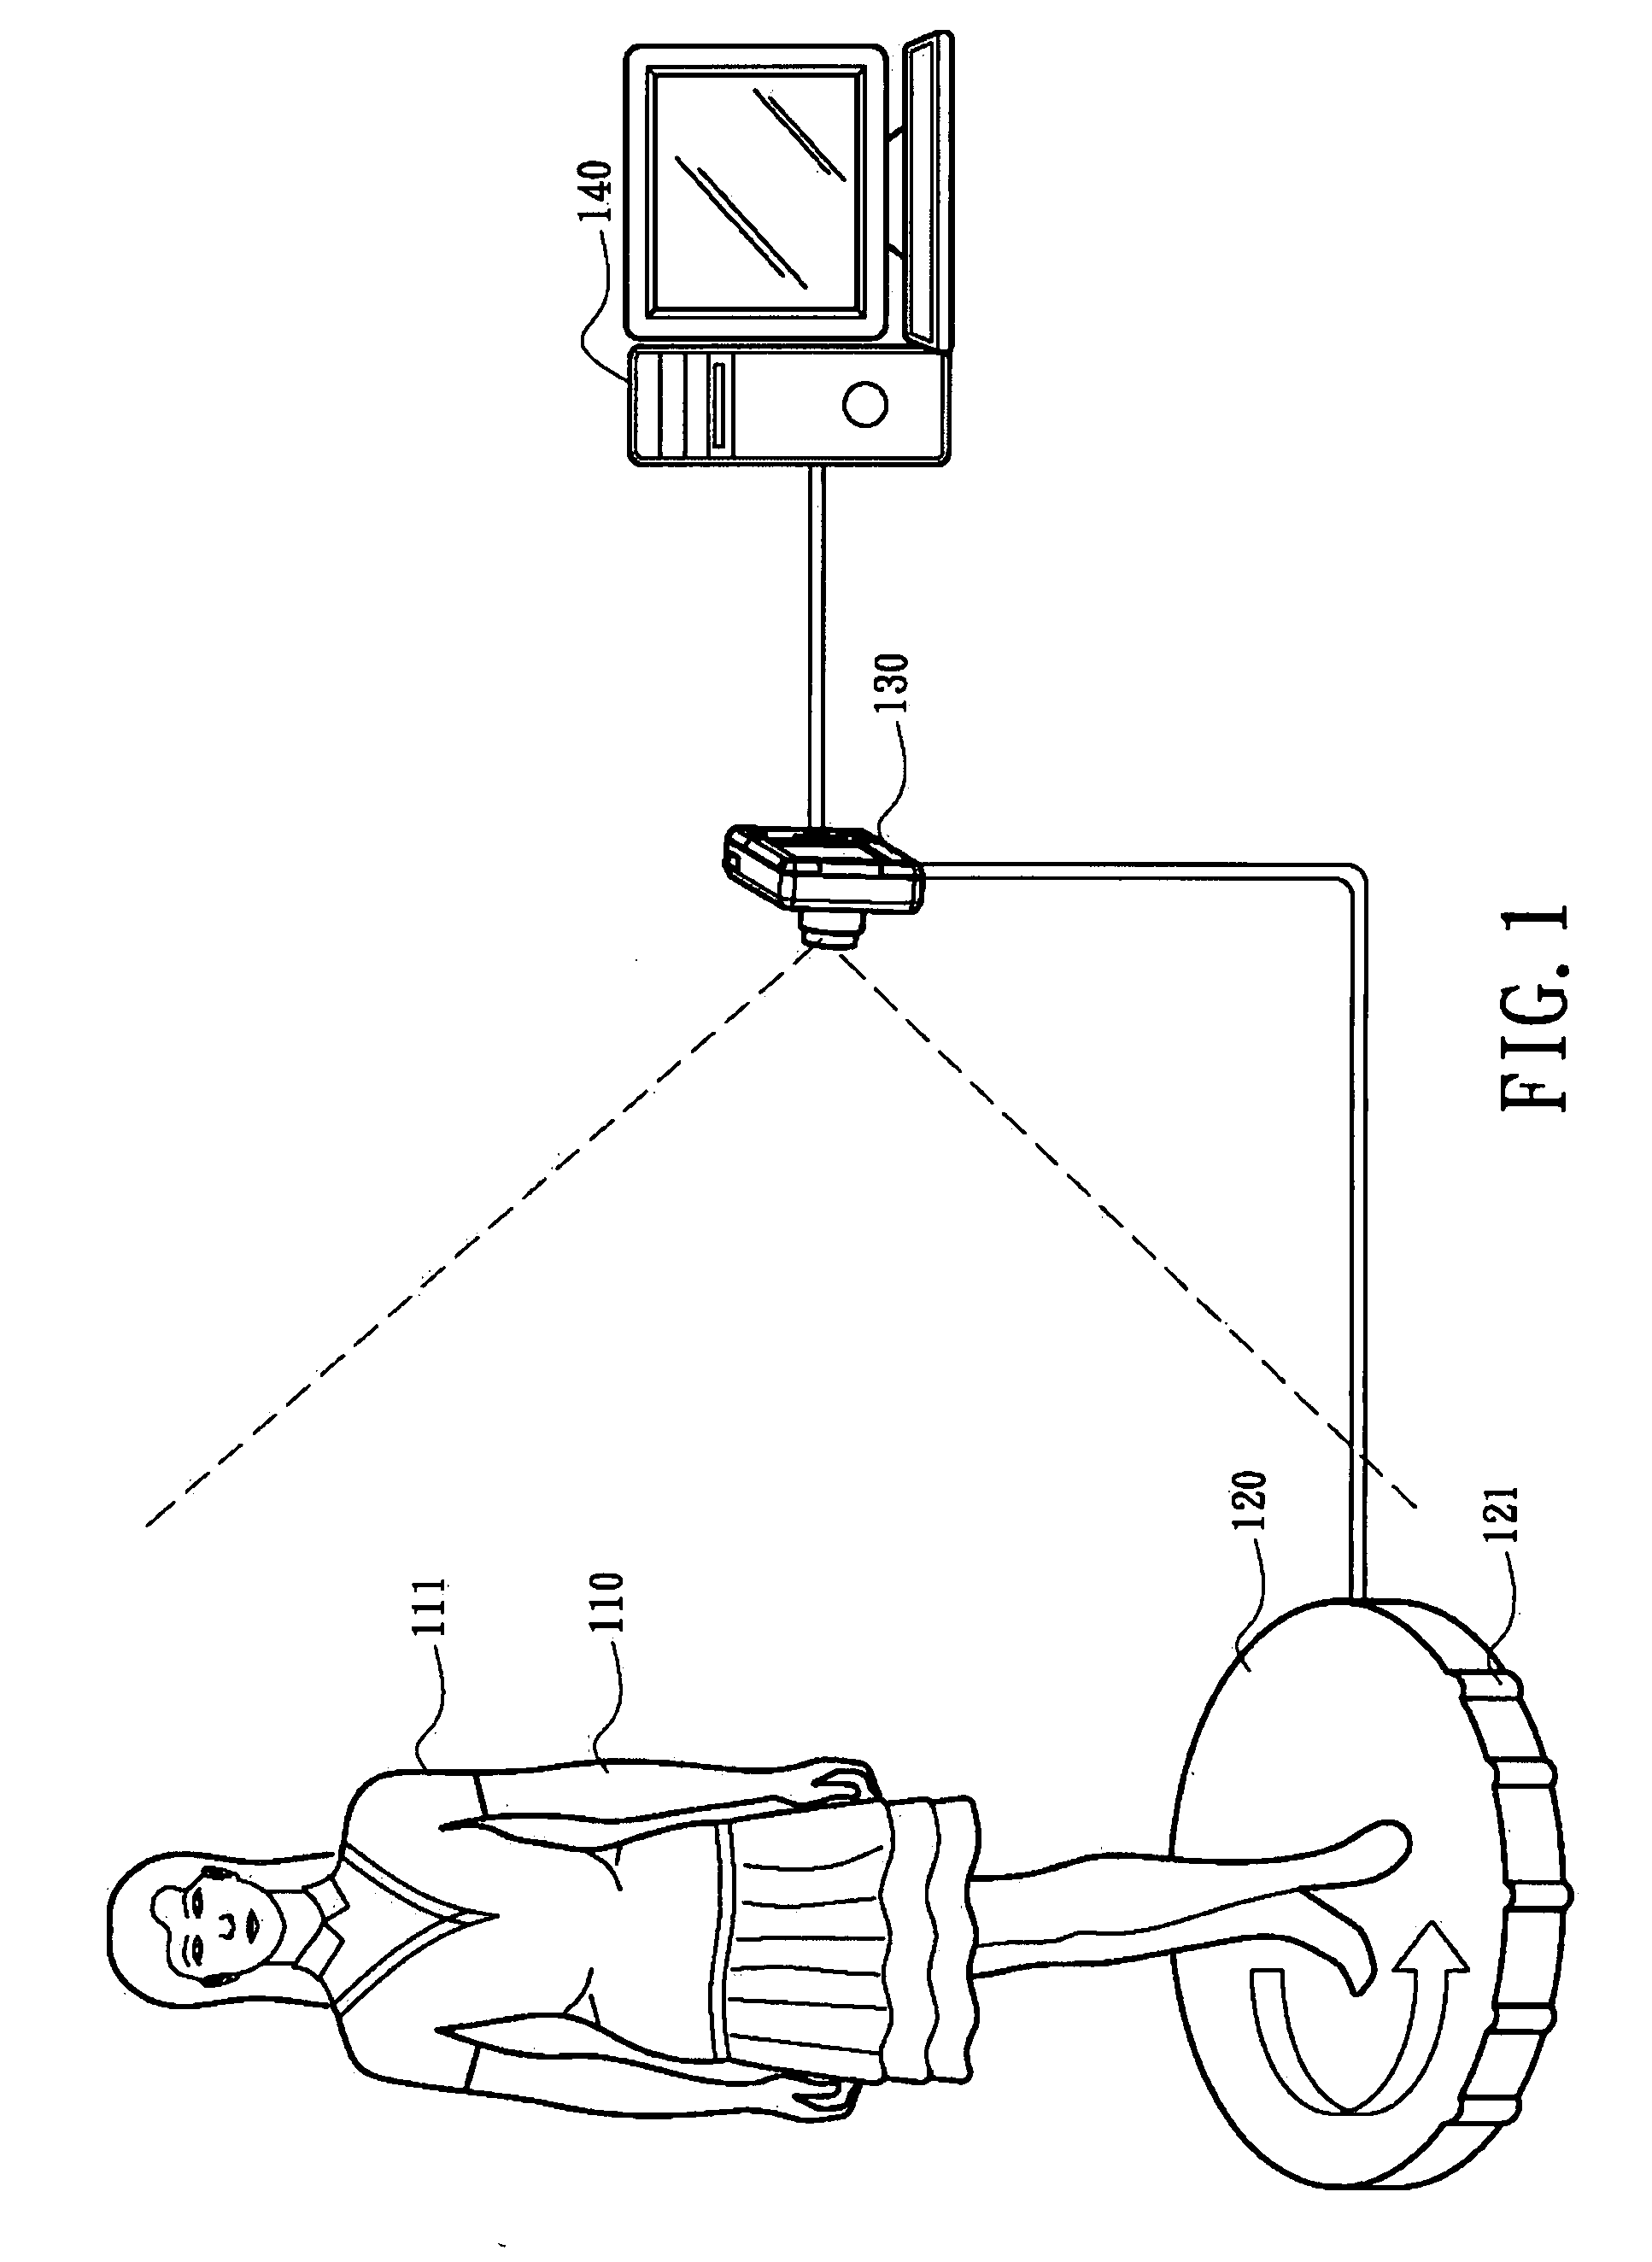 Online clothing display system and method therefor